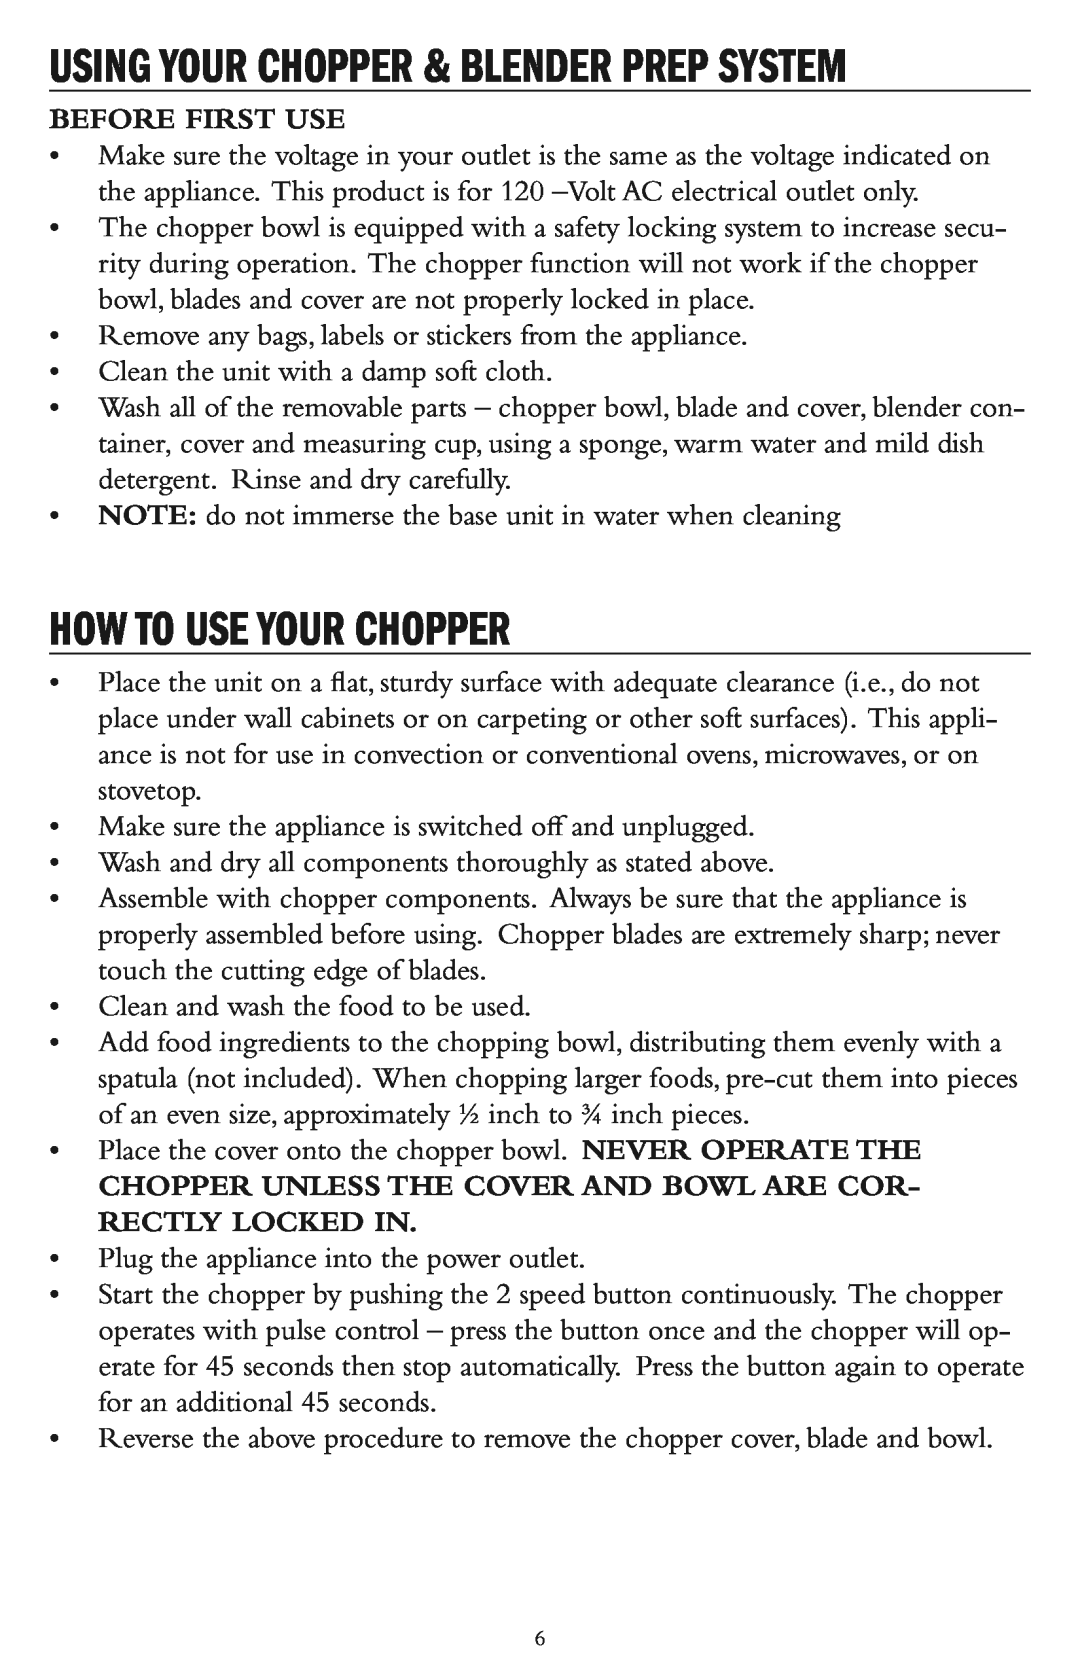 Taylor AC-1200-BL instruction manual How To Use Your Chopper, Using Your Chopper & Blender Prep System, Before First Use 